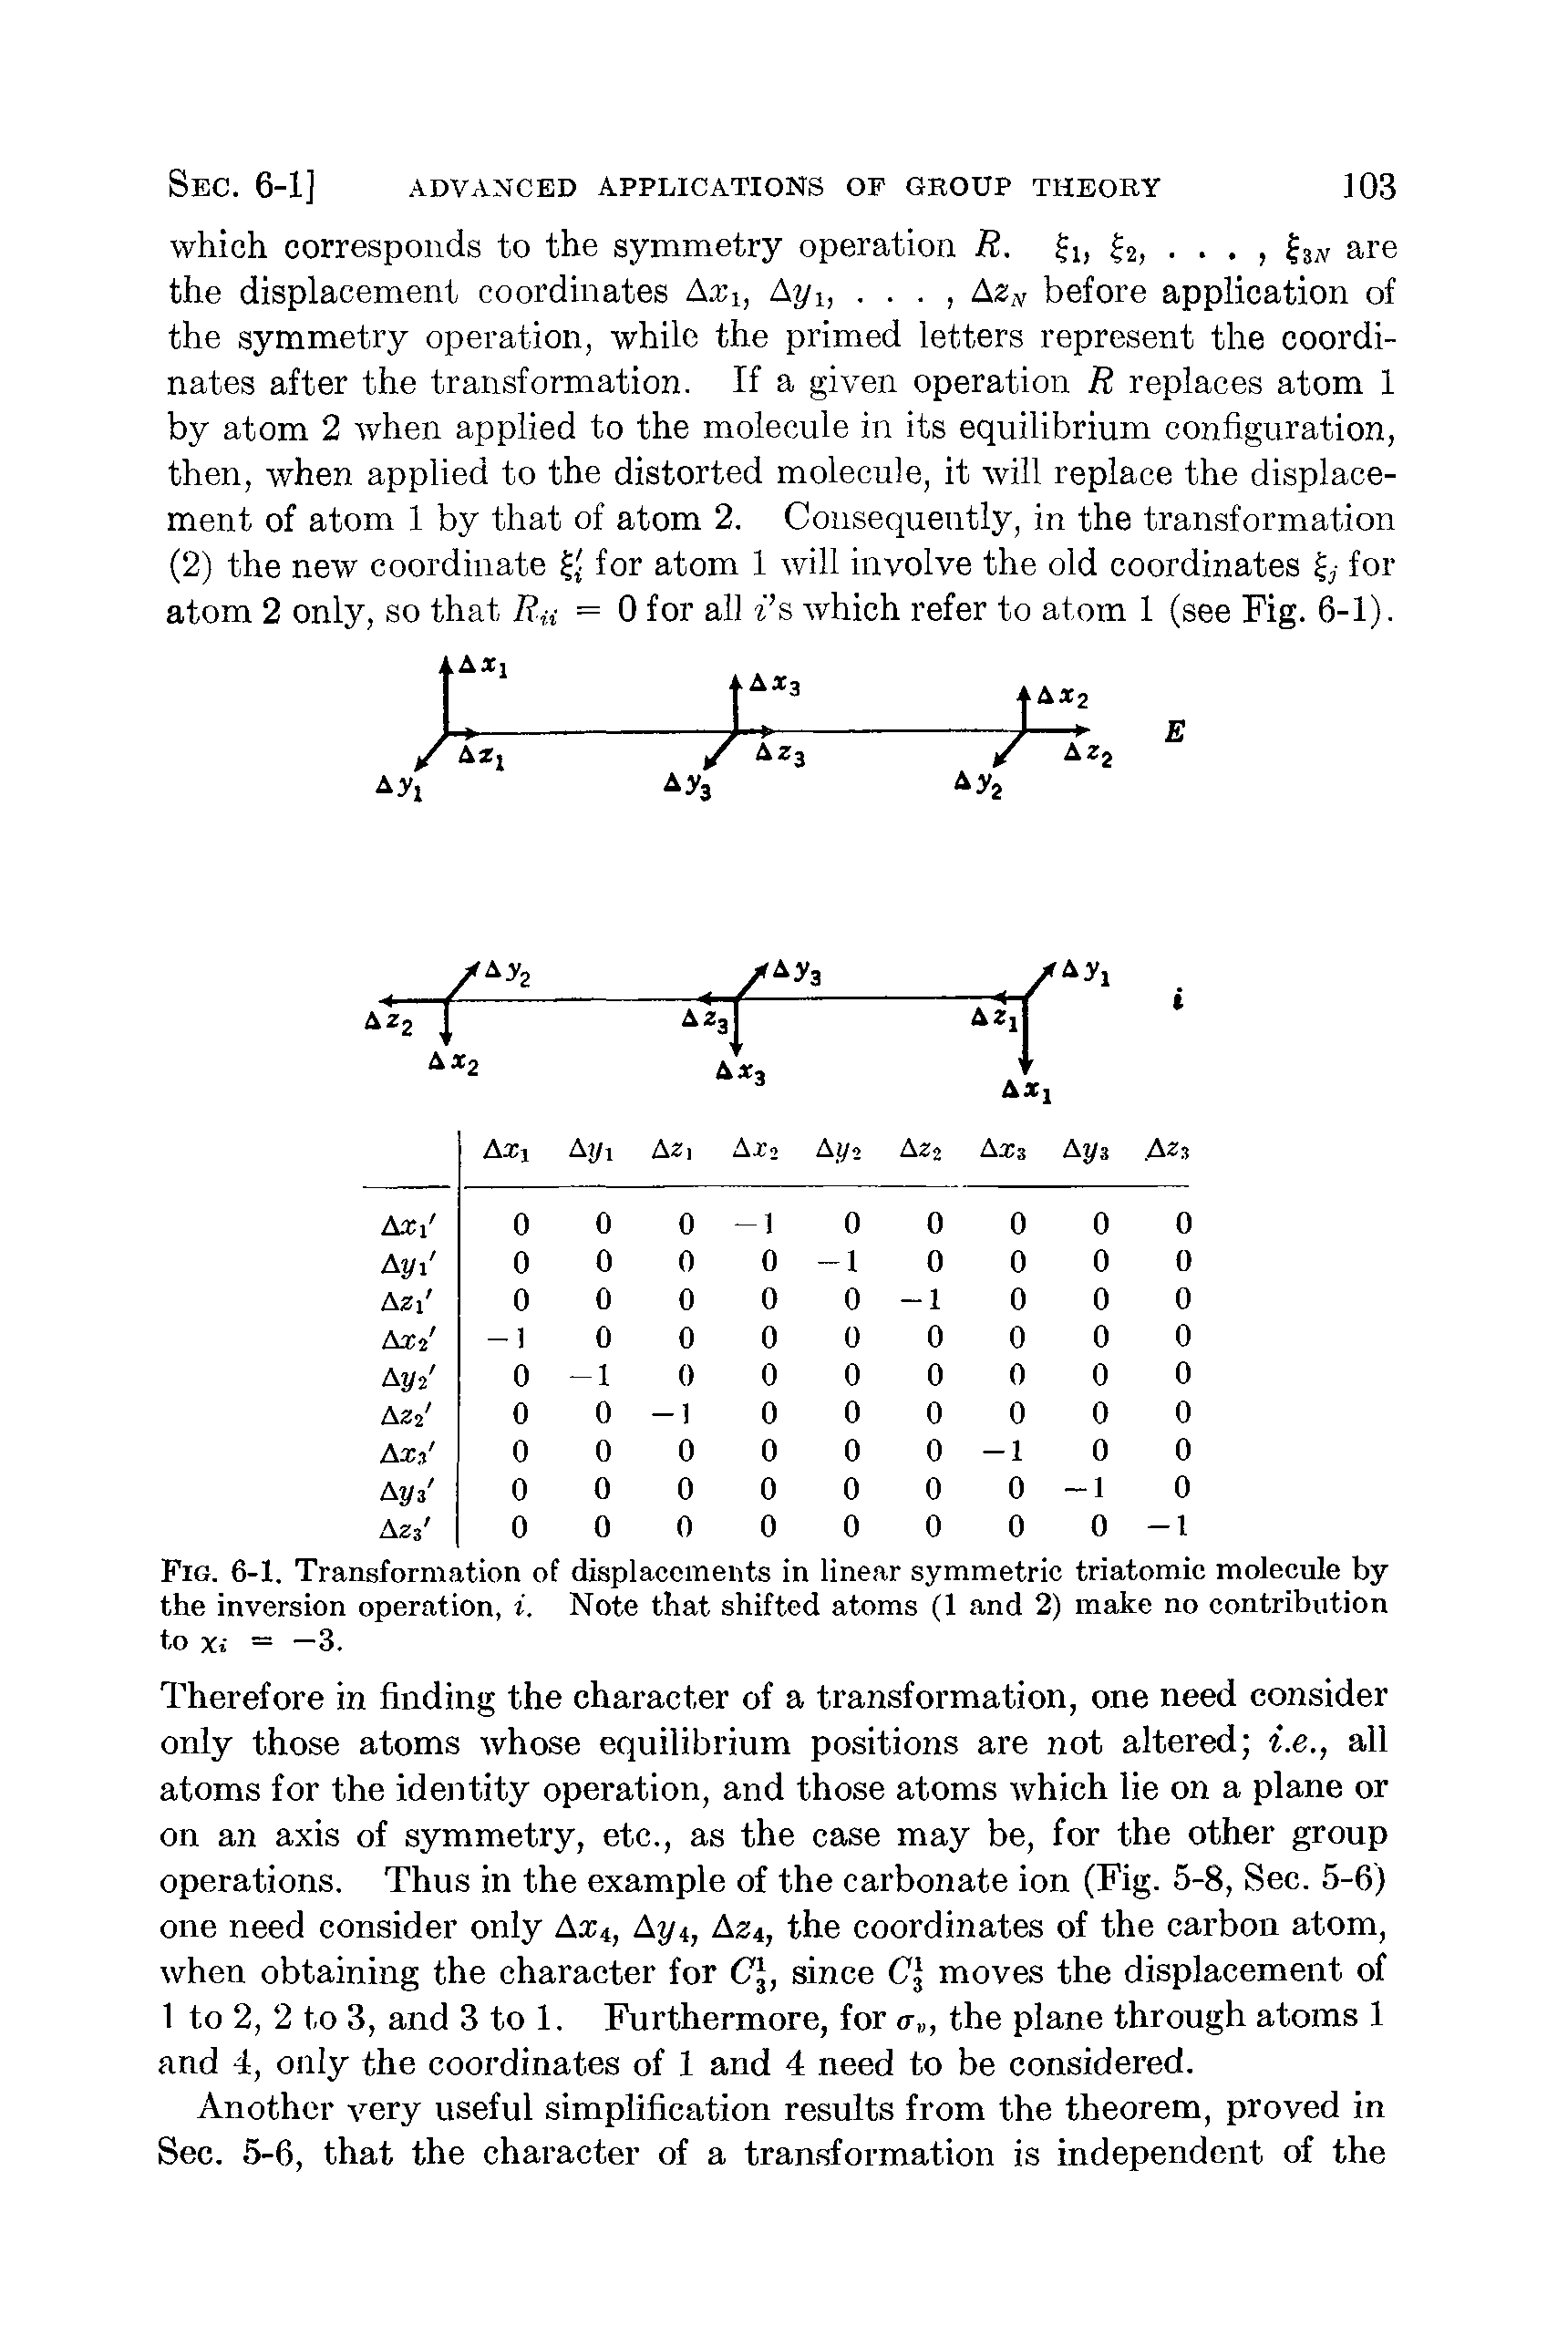 Fig. 6-1. Transformation of displacements in linear symmetric triatomic molecule by the inversion operation, i. Note that shifted atoms (1 and 2) make no contribution to xi = —3.